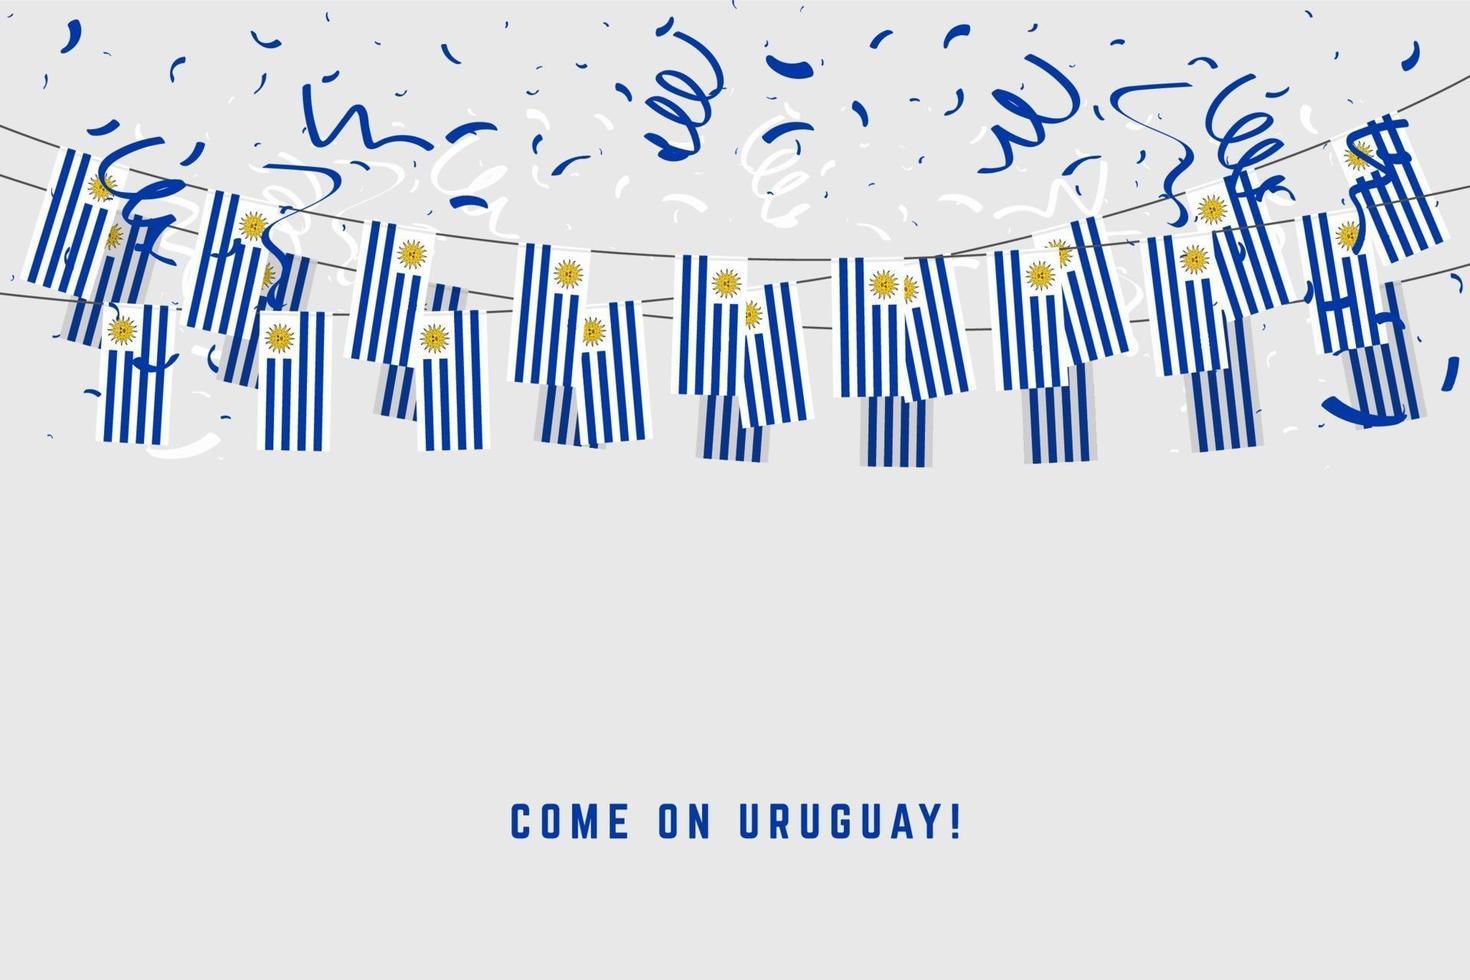 Uruguay garland flag with confetti on gray background. vector